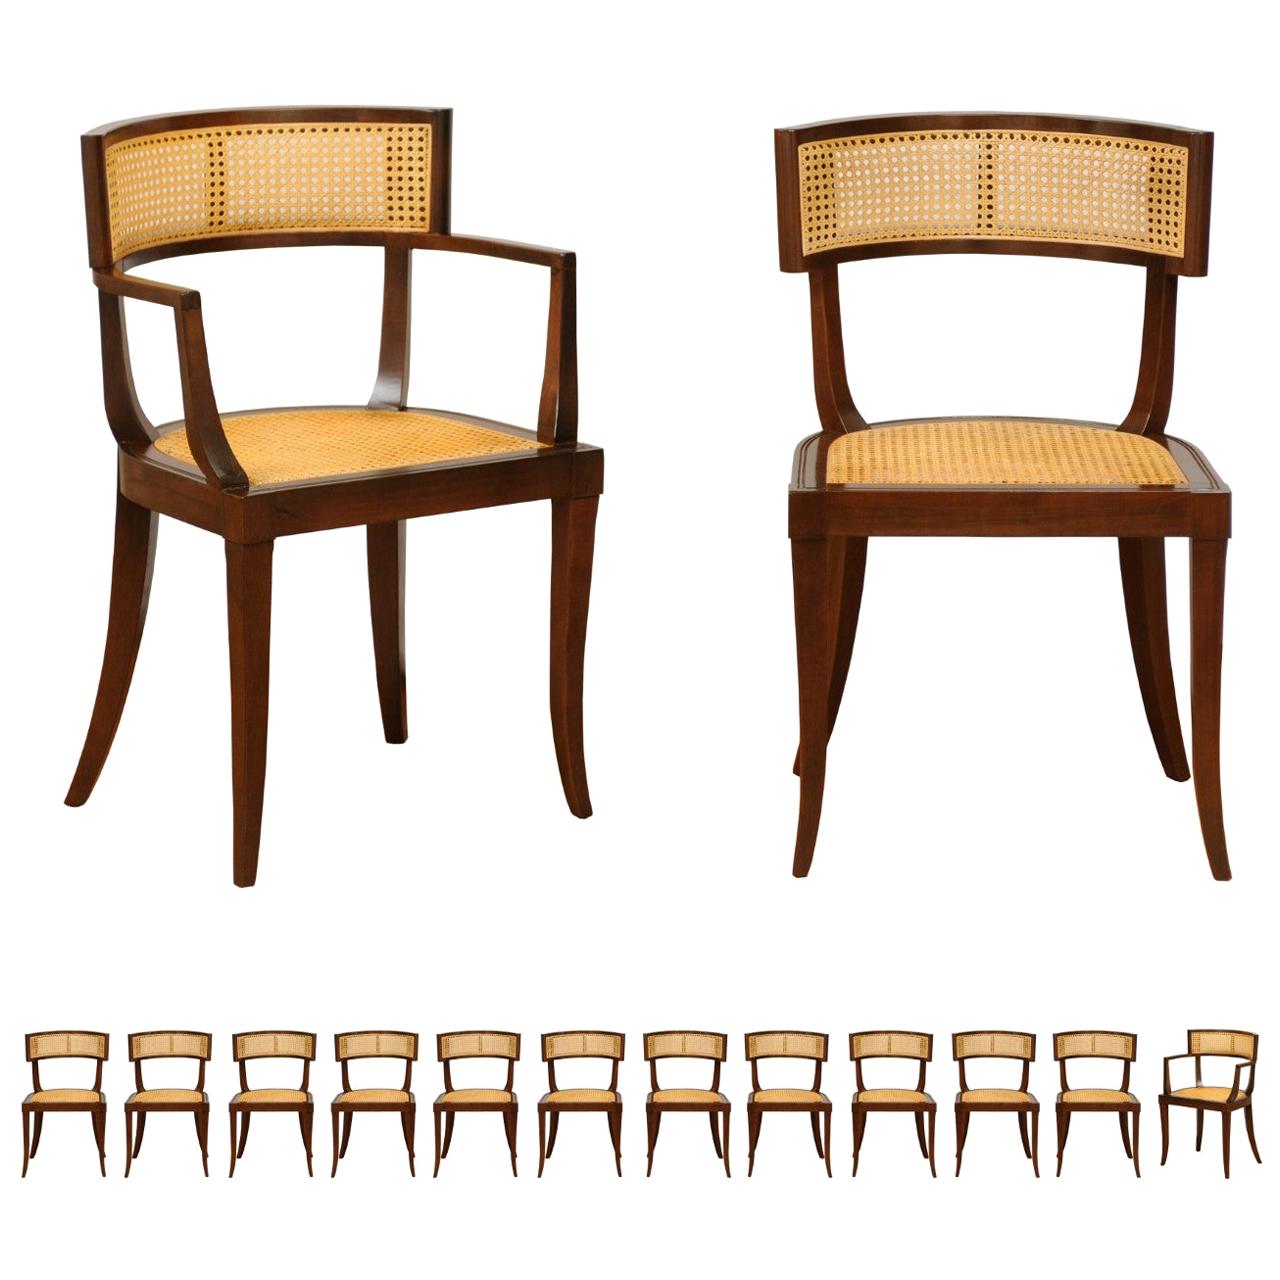 Exquisite Set of 14 Klismos Cane Dining Chairs by Baker, circa 1958, Cane Seats